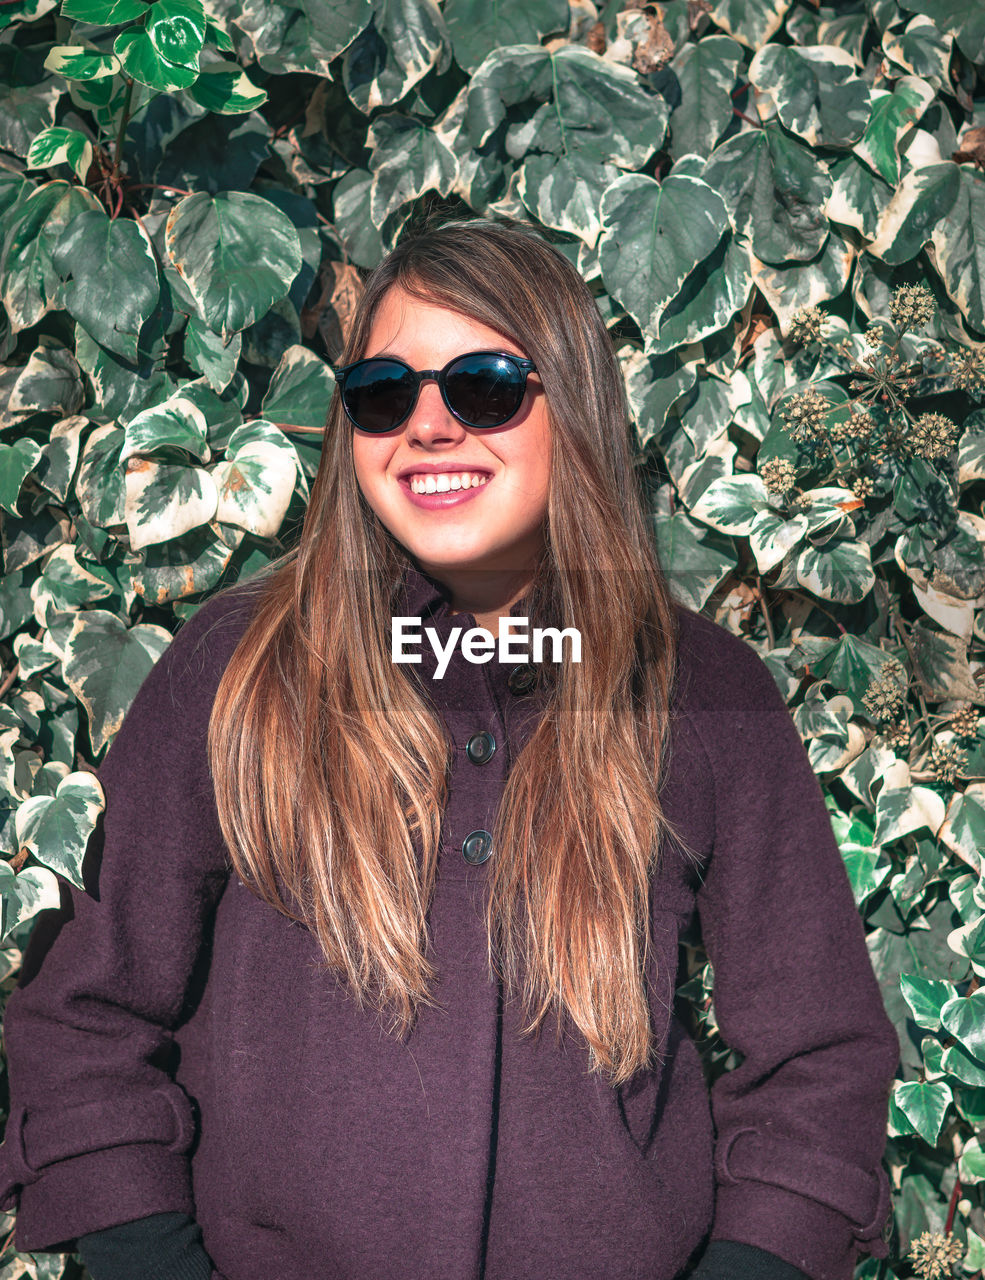 PORTRAIT OF A SMILING YOUNG WOMAN WEARING SUNGLASSES OUTDOORS